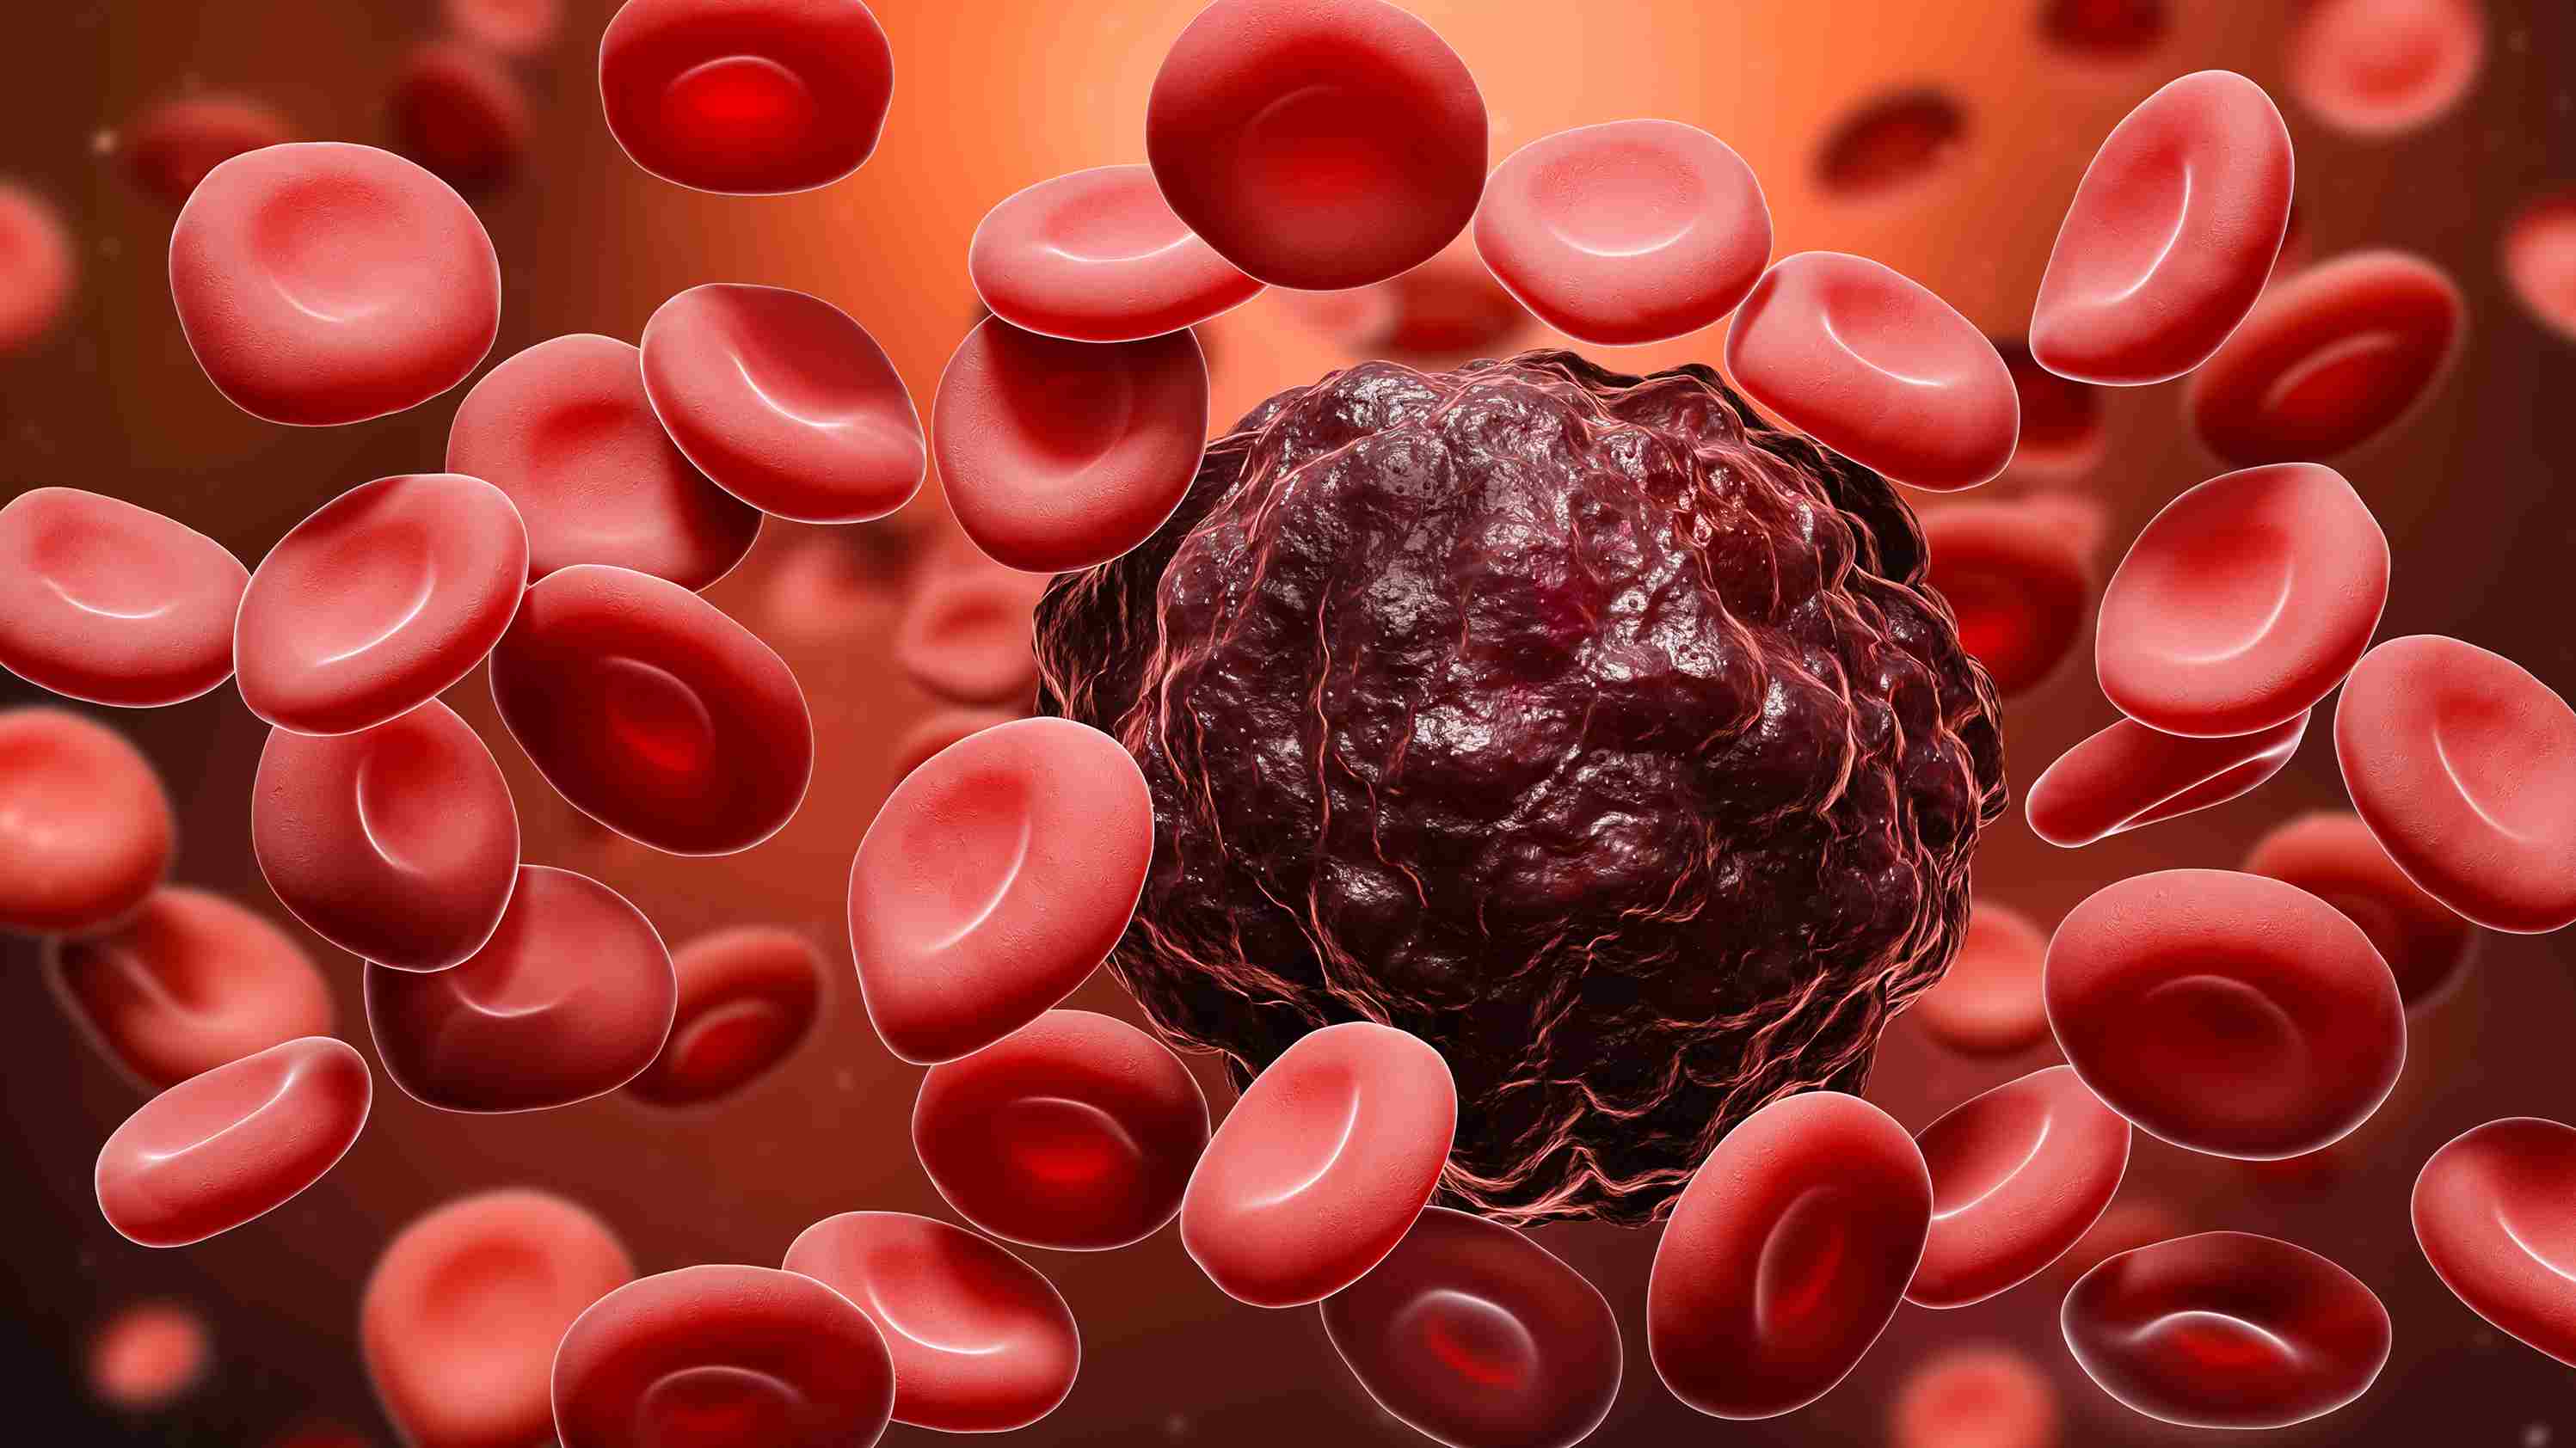 Blood Cancer Treatment Cost in India